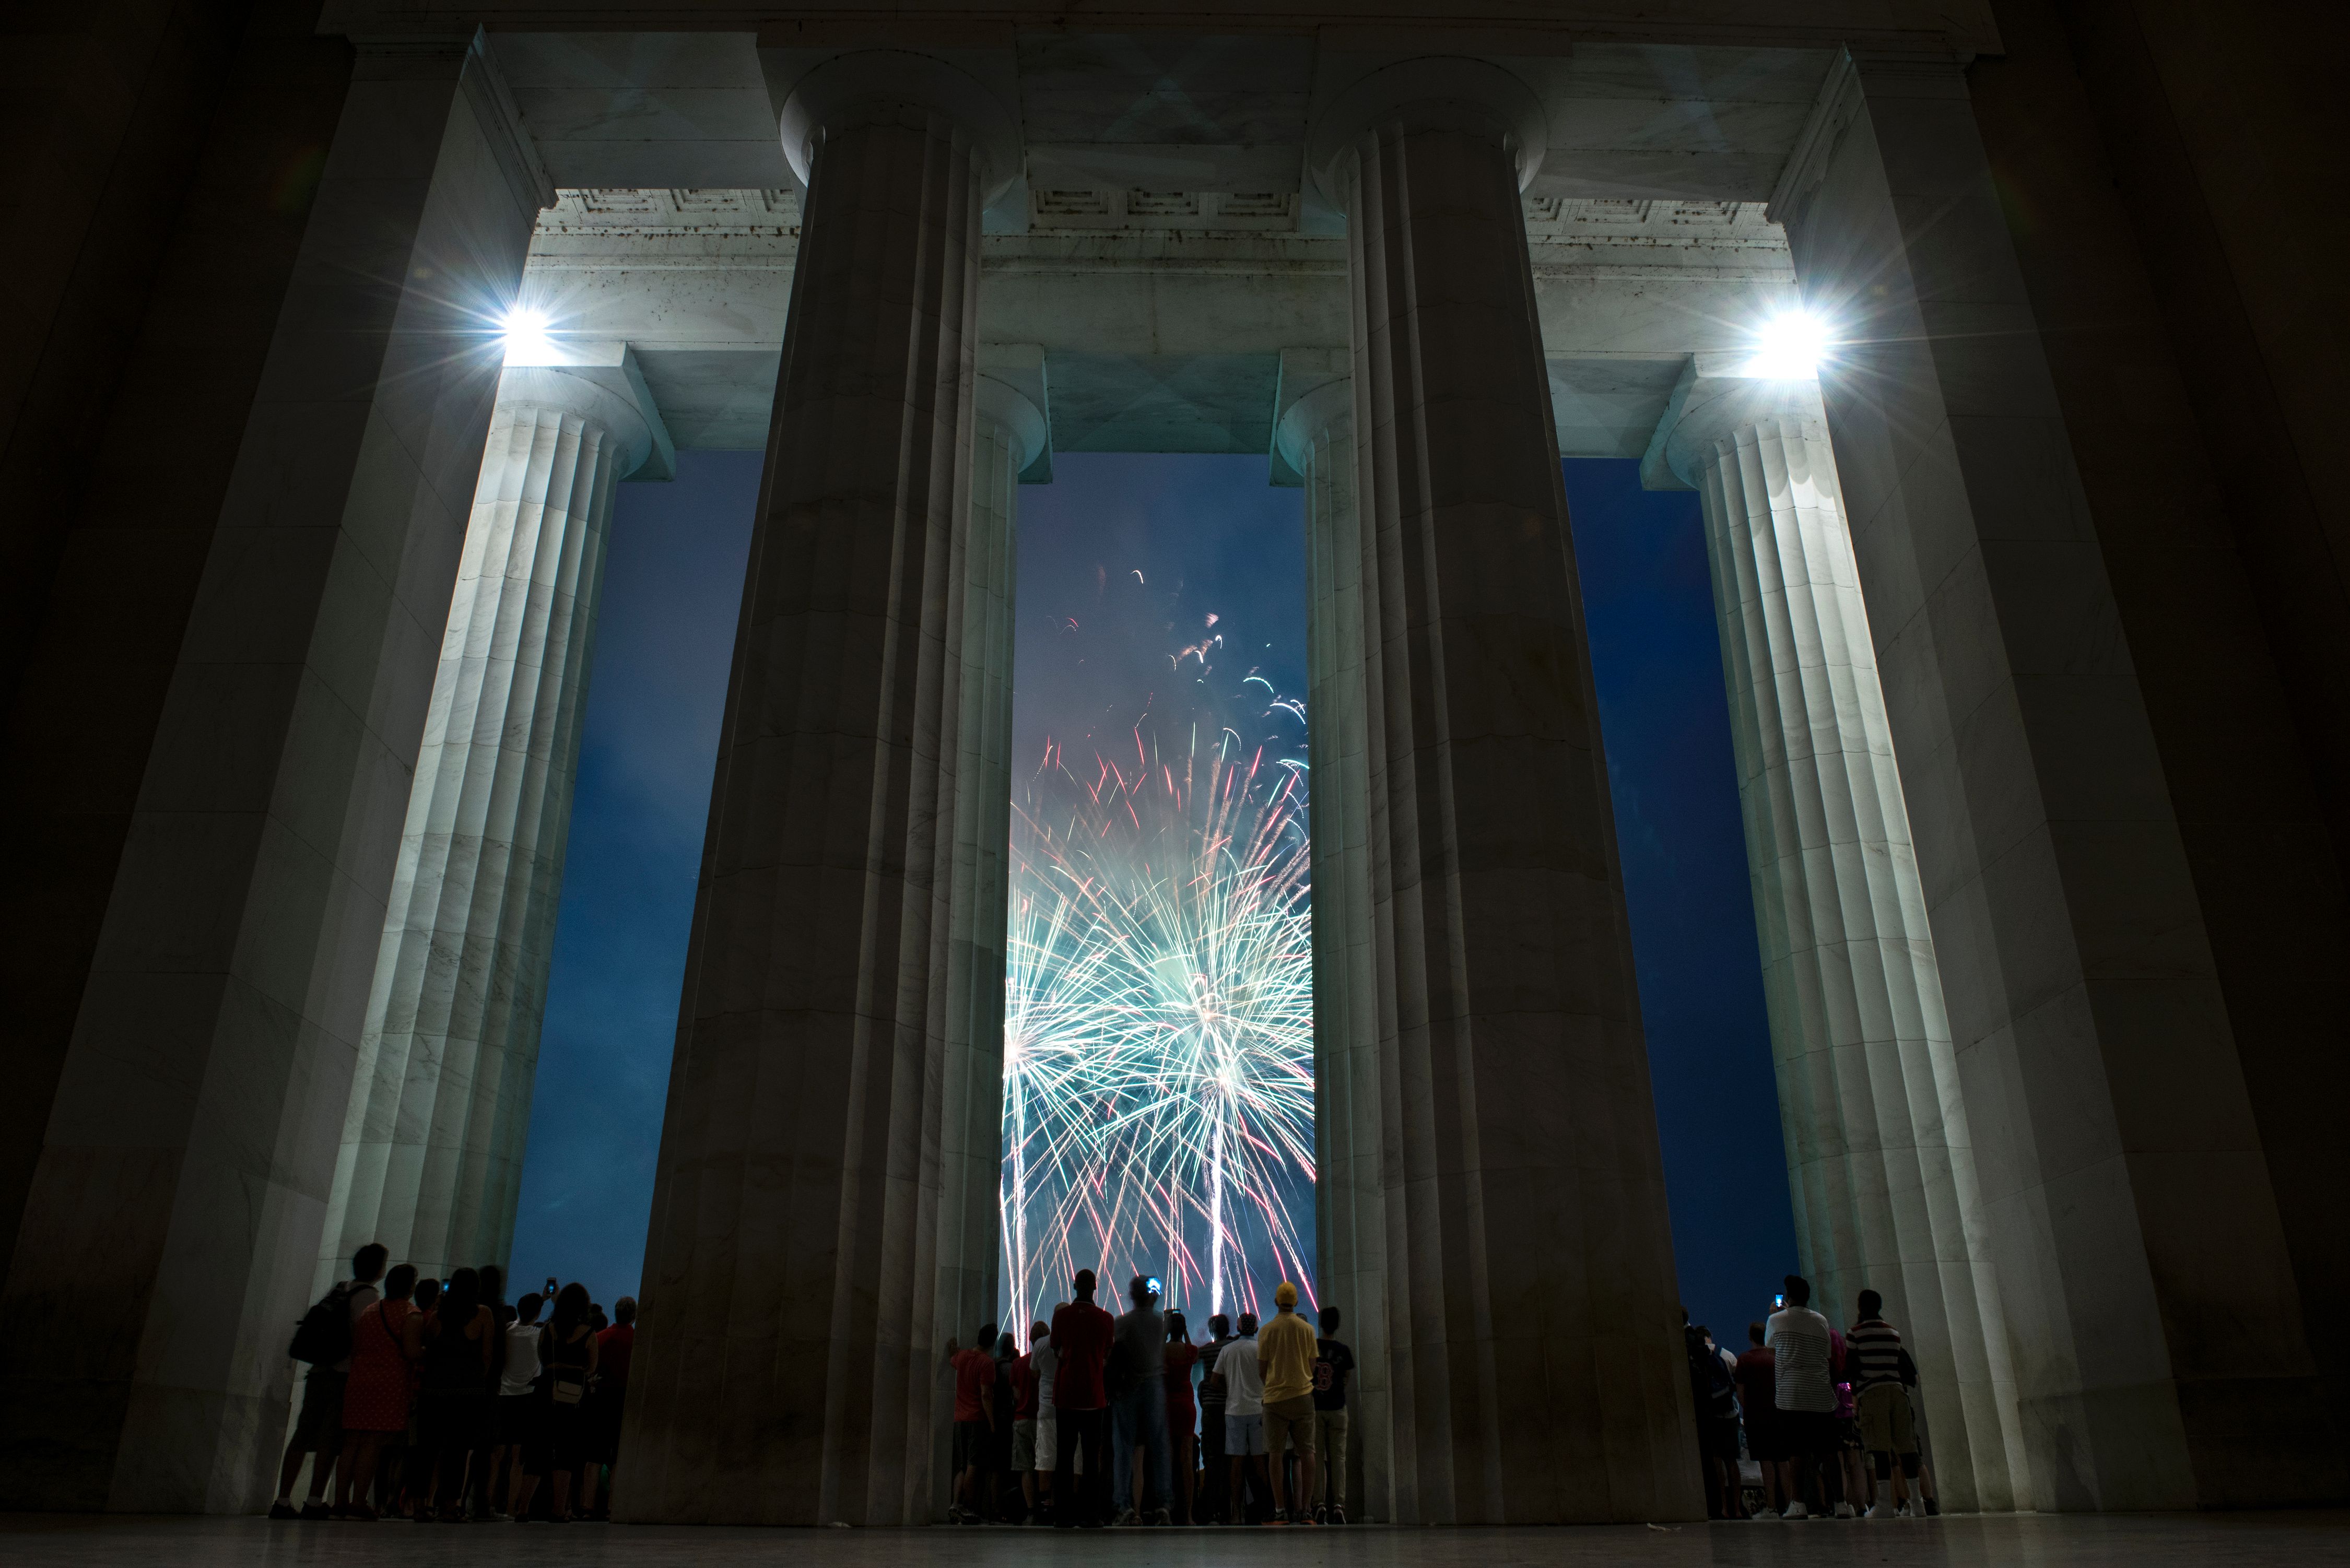 People watch fireworks as they celebrate US independence day on July 4, 2017 in Washington, DC. / AFP PHOTO / Brendan Smialowski (Photo credit should read BRENDAN SMIALOWSKI/AFP/Getty Images)